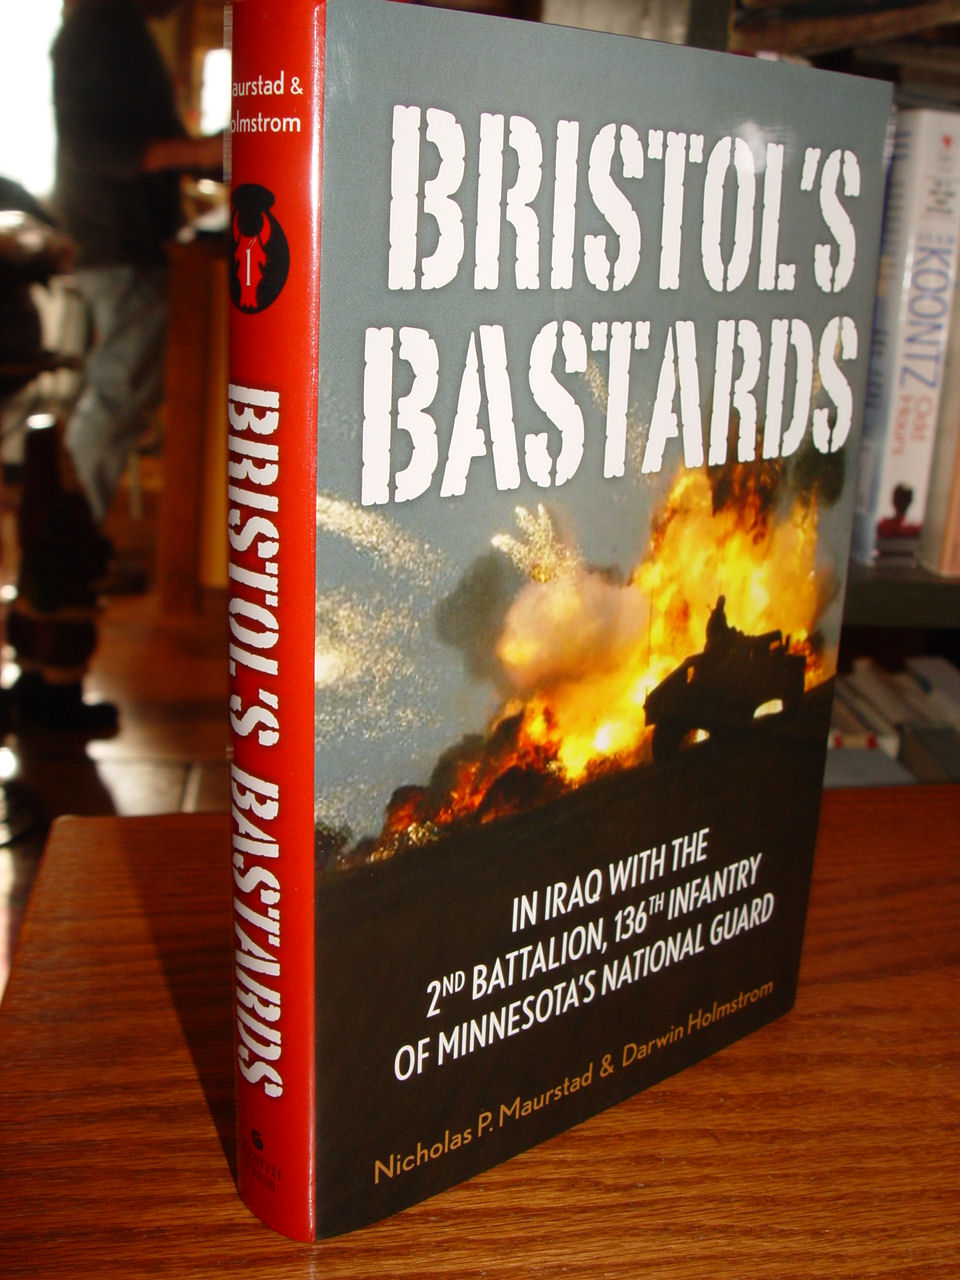 Bristol's
                        Bastards: In Iraq with the 2nd Battalion, 136th
                        Infantry of Minnesota's National Guard Book by
                        Darwin Holmstrom and Nick Maurstad 2008